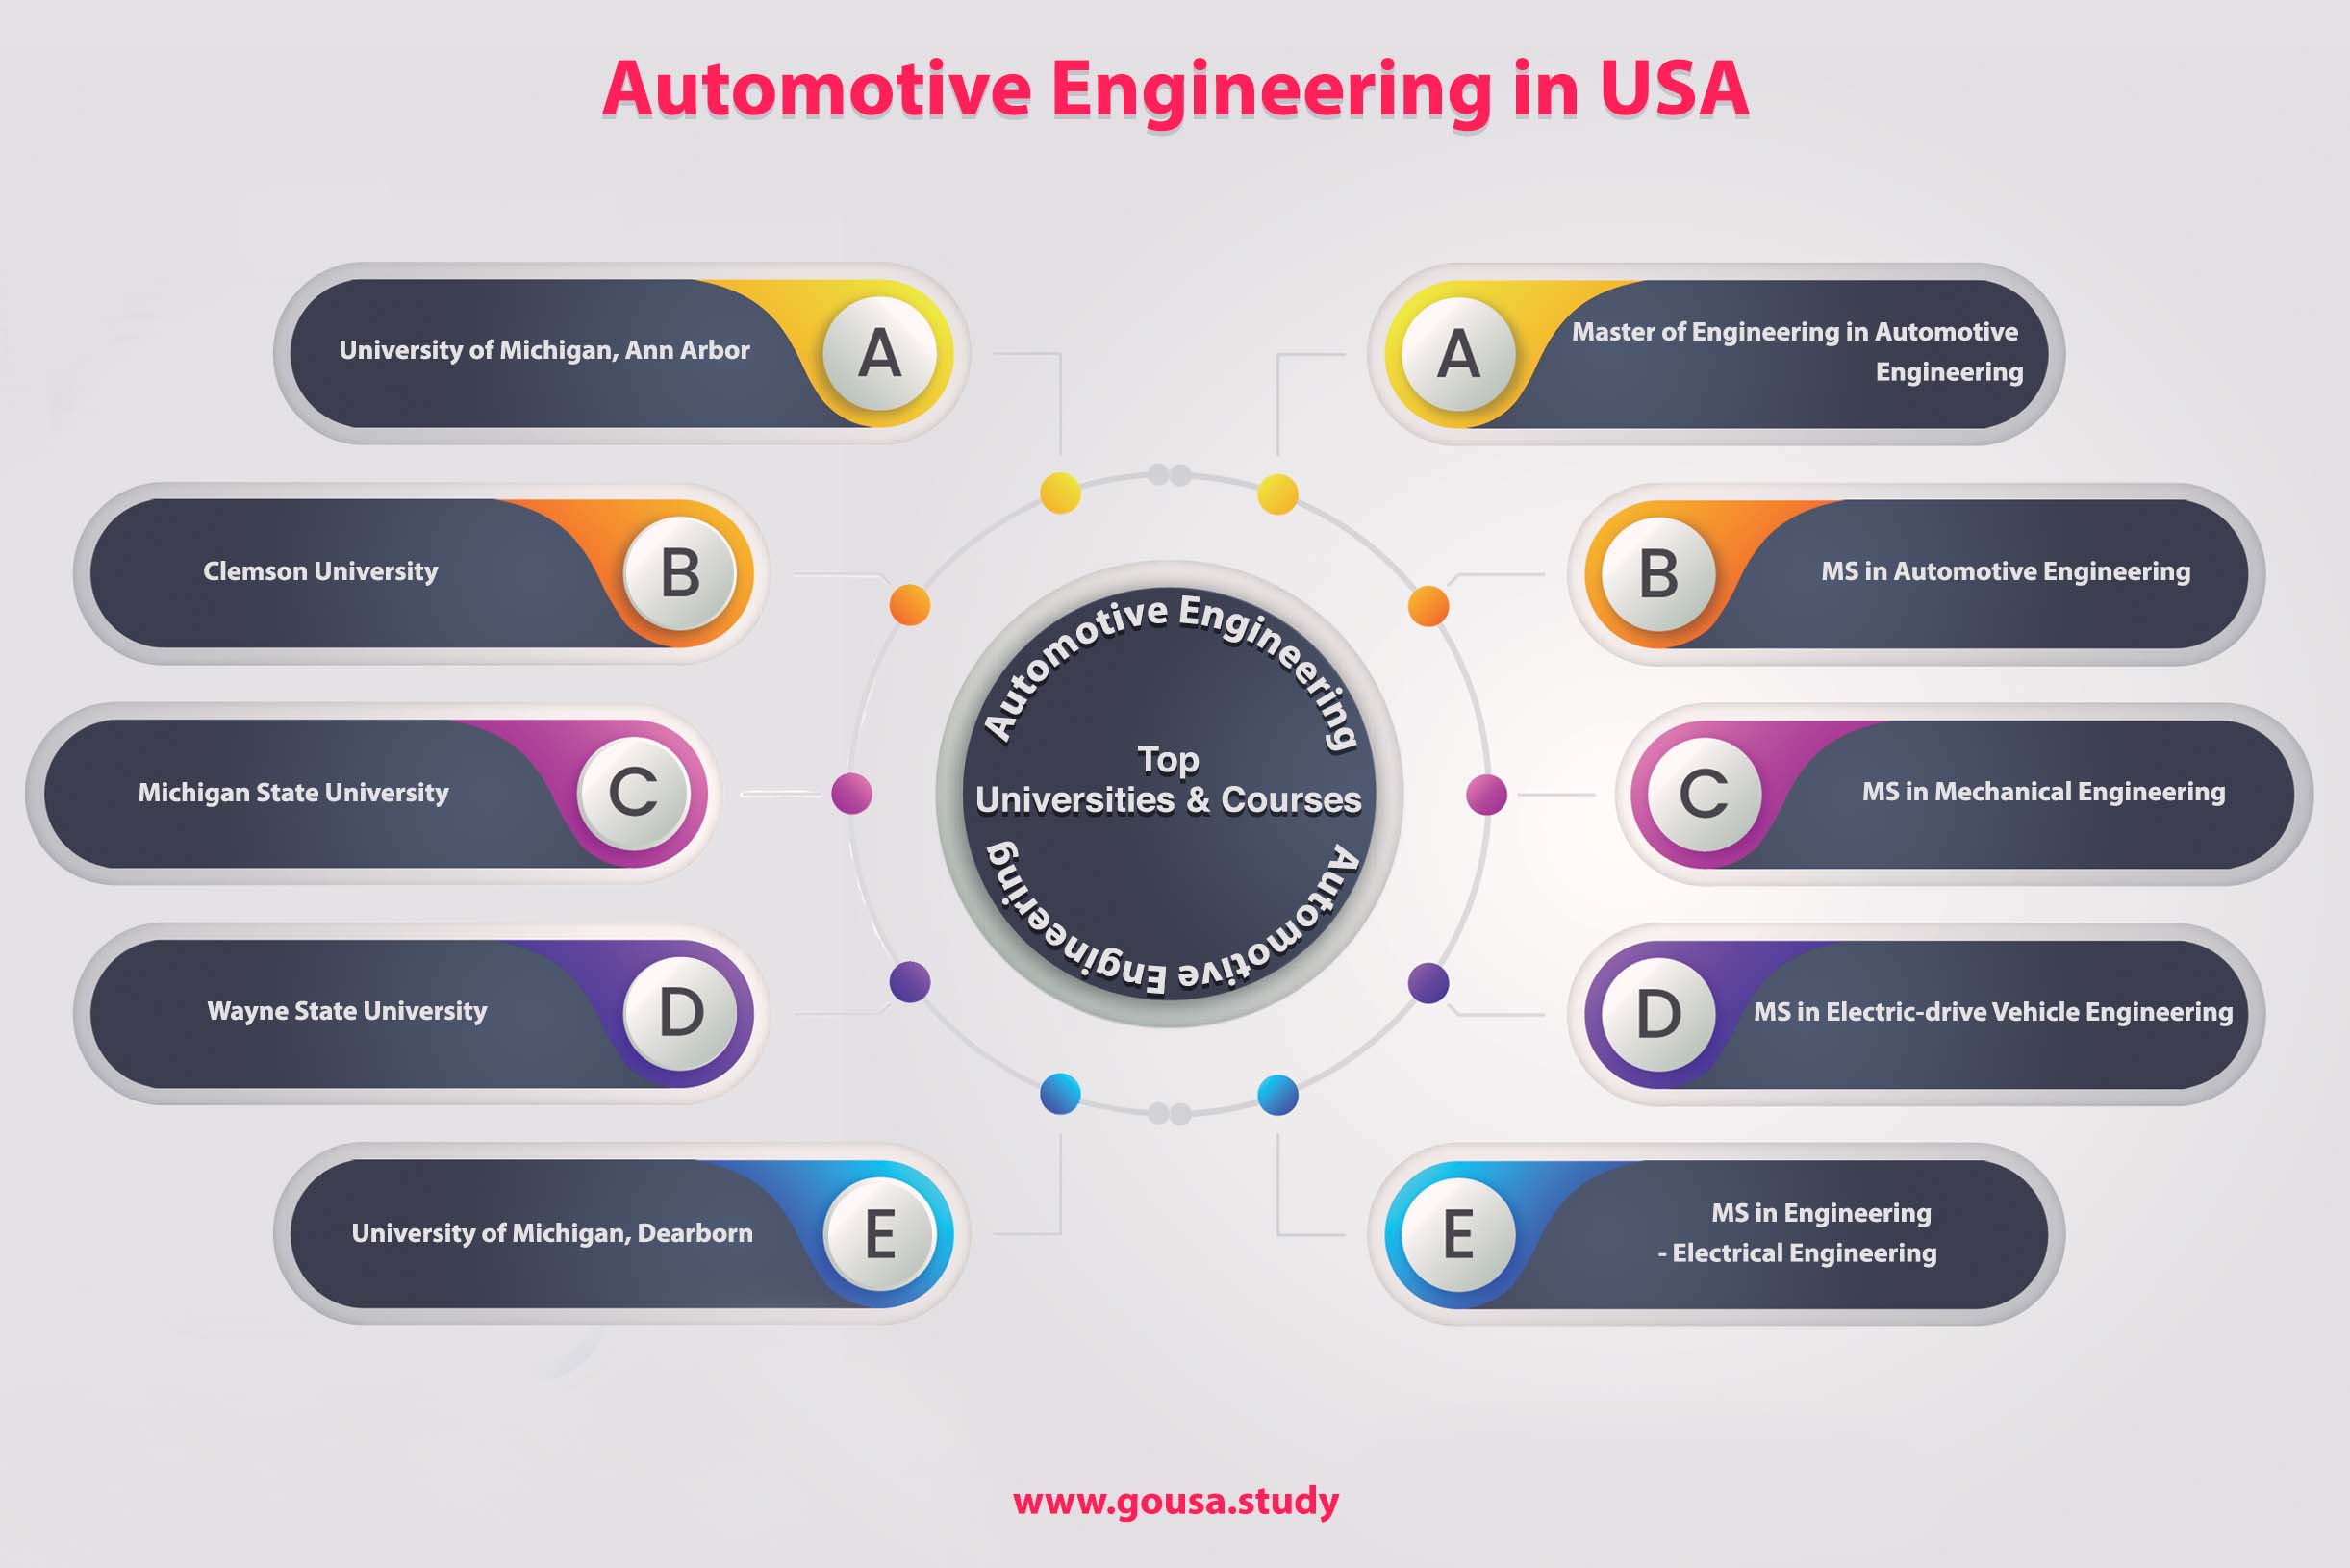 Automative Engineering in USA